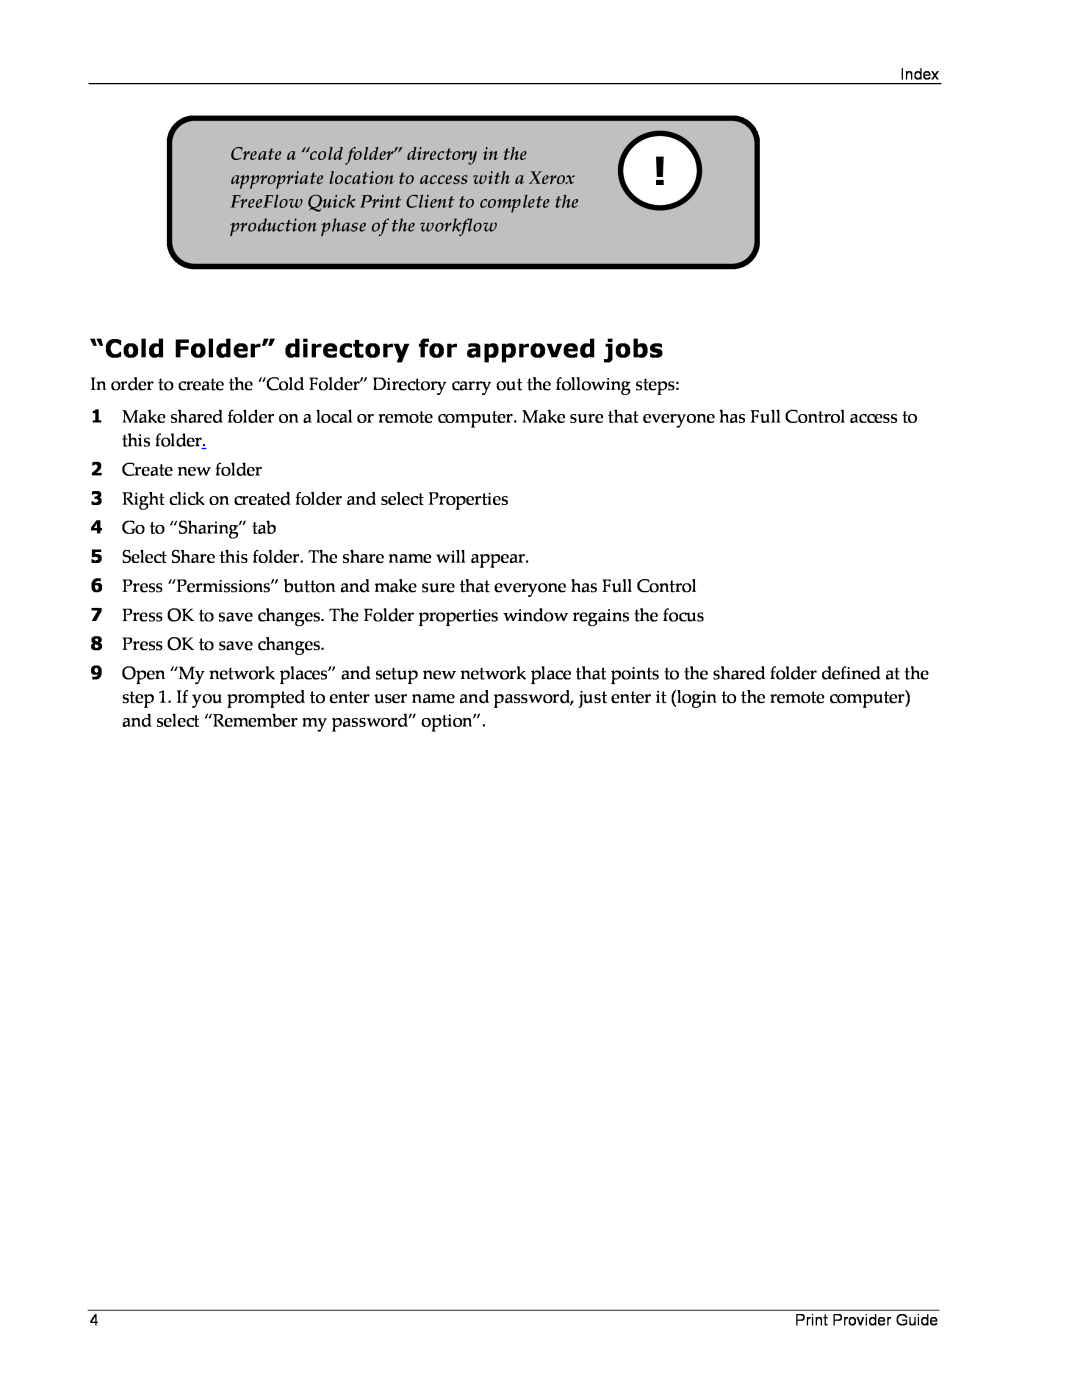 Xerox 701P45570 manual “Cold Folder” directory for approved jobs 